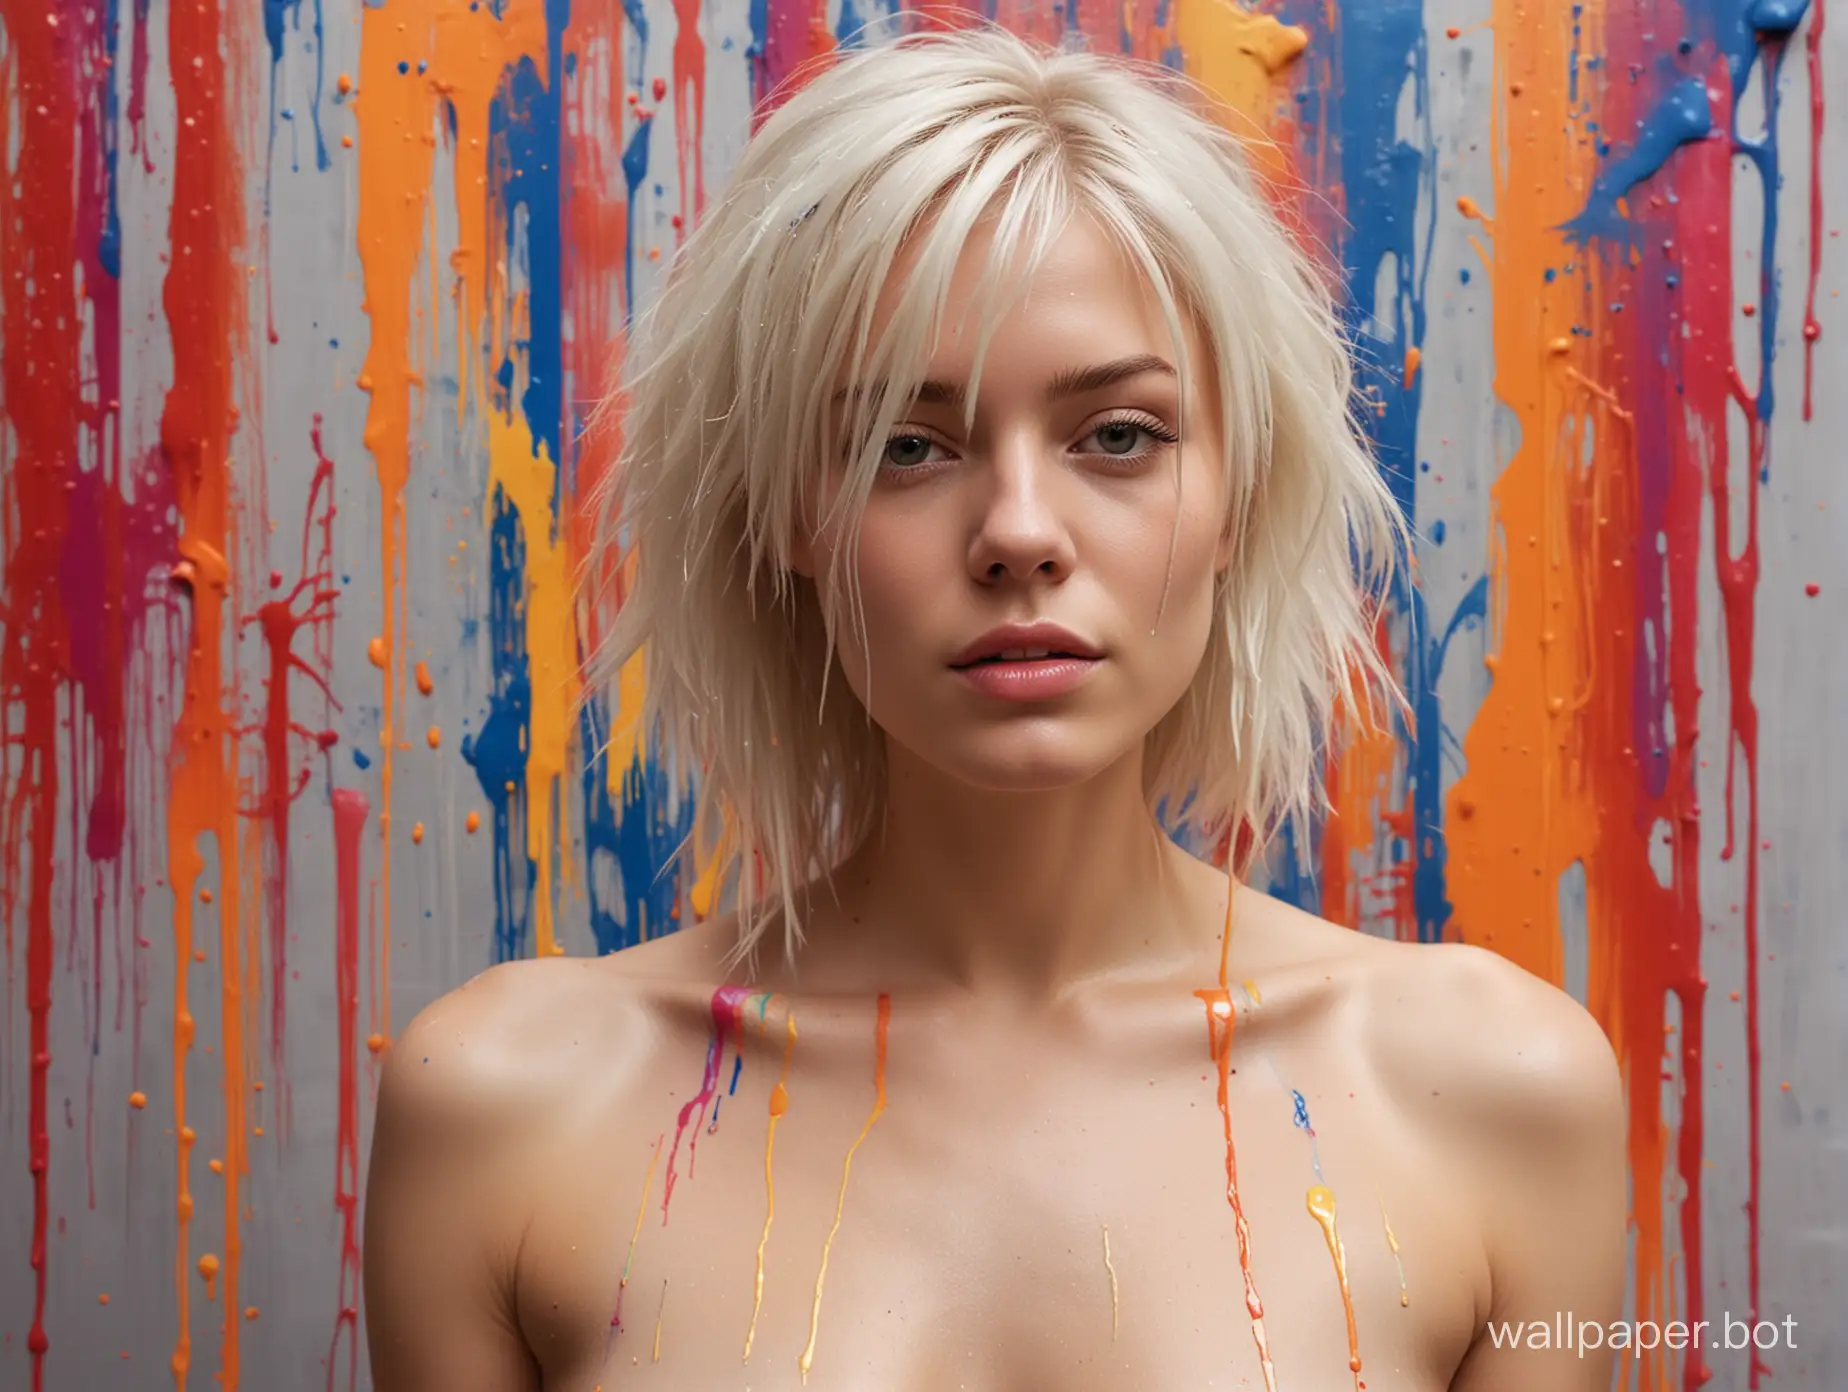 A stunning, provocative photograph of a shapely young woman with platinum blonde hair. She is completely naked, adorned only by strategically placed dripping paint of vibrant colors that artfully cover her body. The paint creates an abstract, artistic effect, enhancing the woman's natural beauty. The background features a minimalist, monochromatic palette, allowing the focus to remain on the subject and the colorful paint., painting, photo